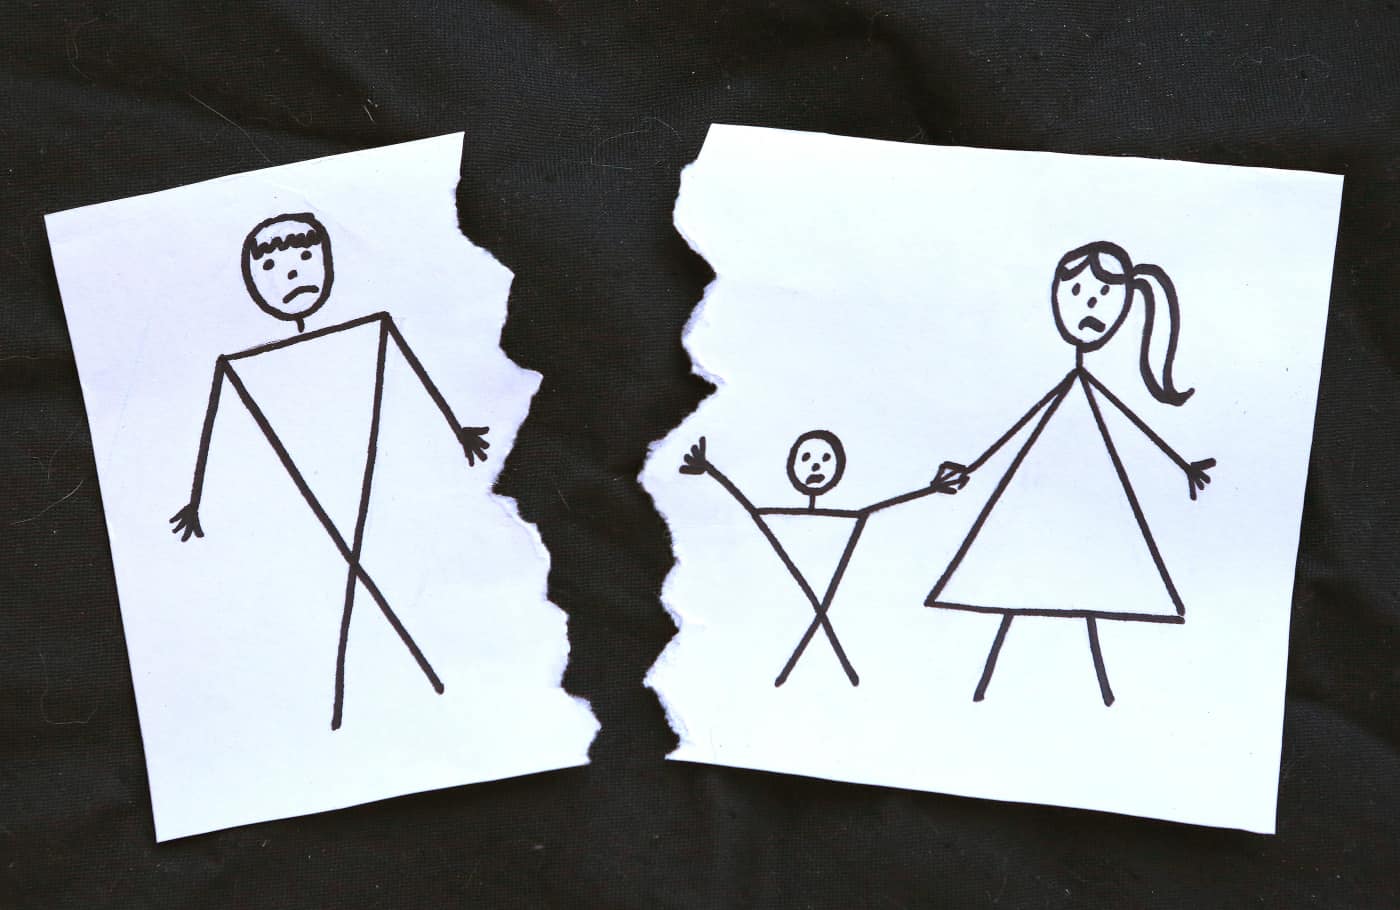 Stick figure illustration of divorce and/or sepaation